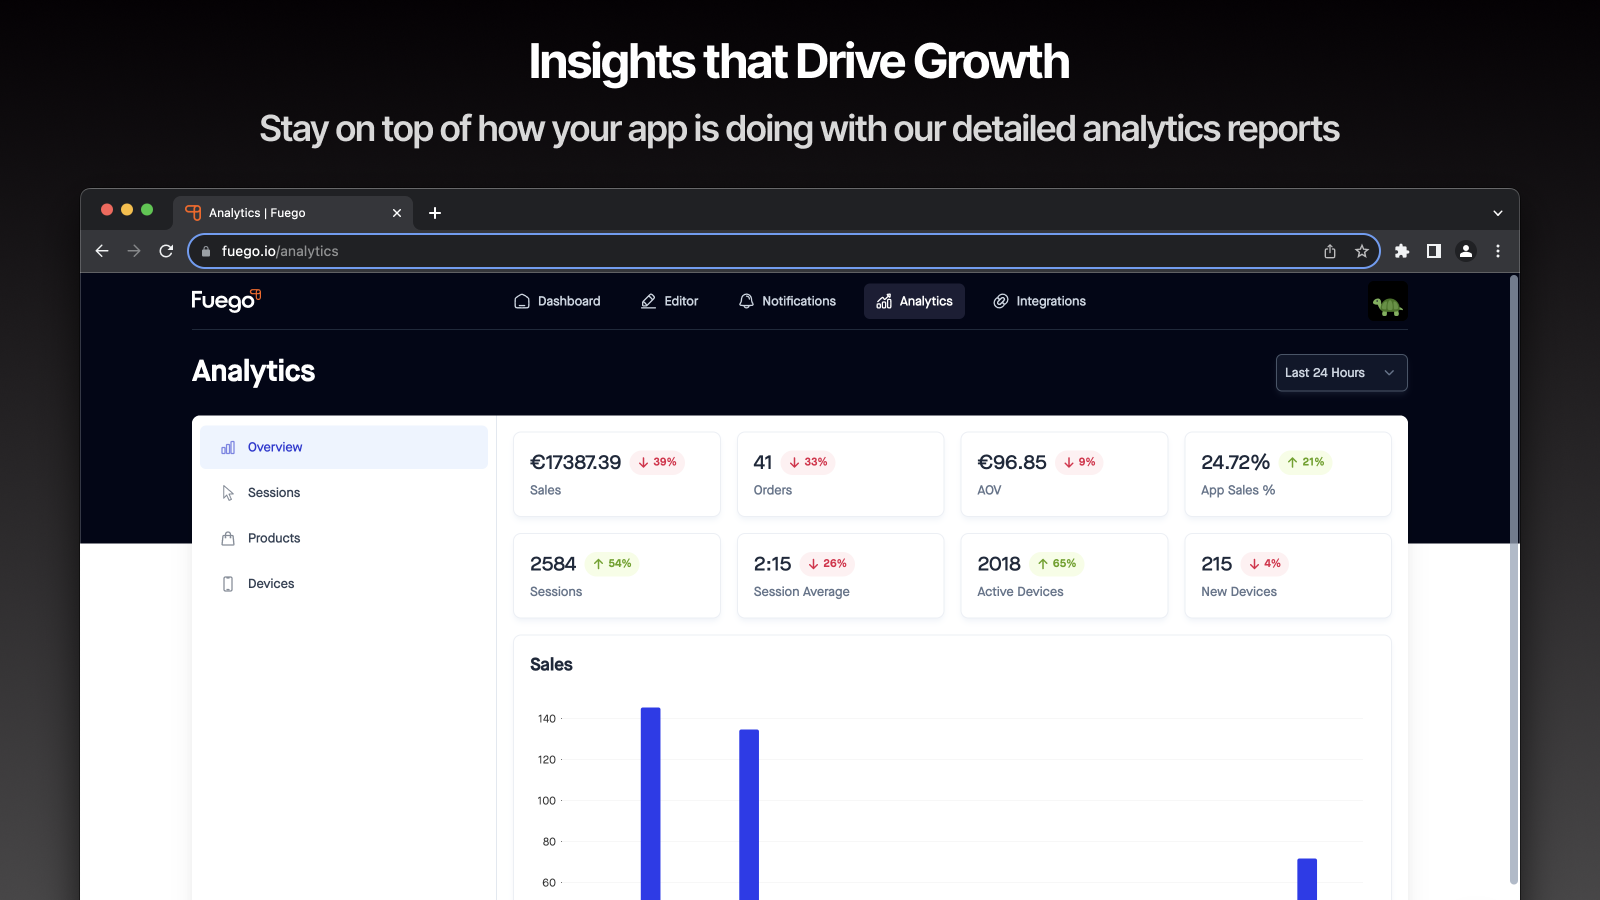 Insights that Drive Growth - Stay on top of your apps usage